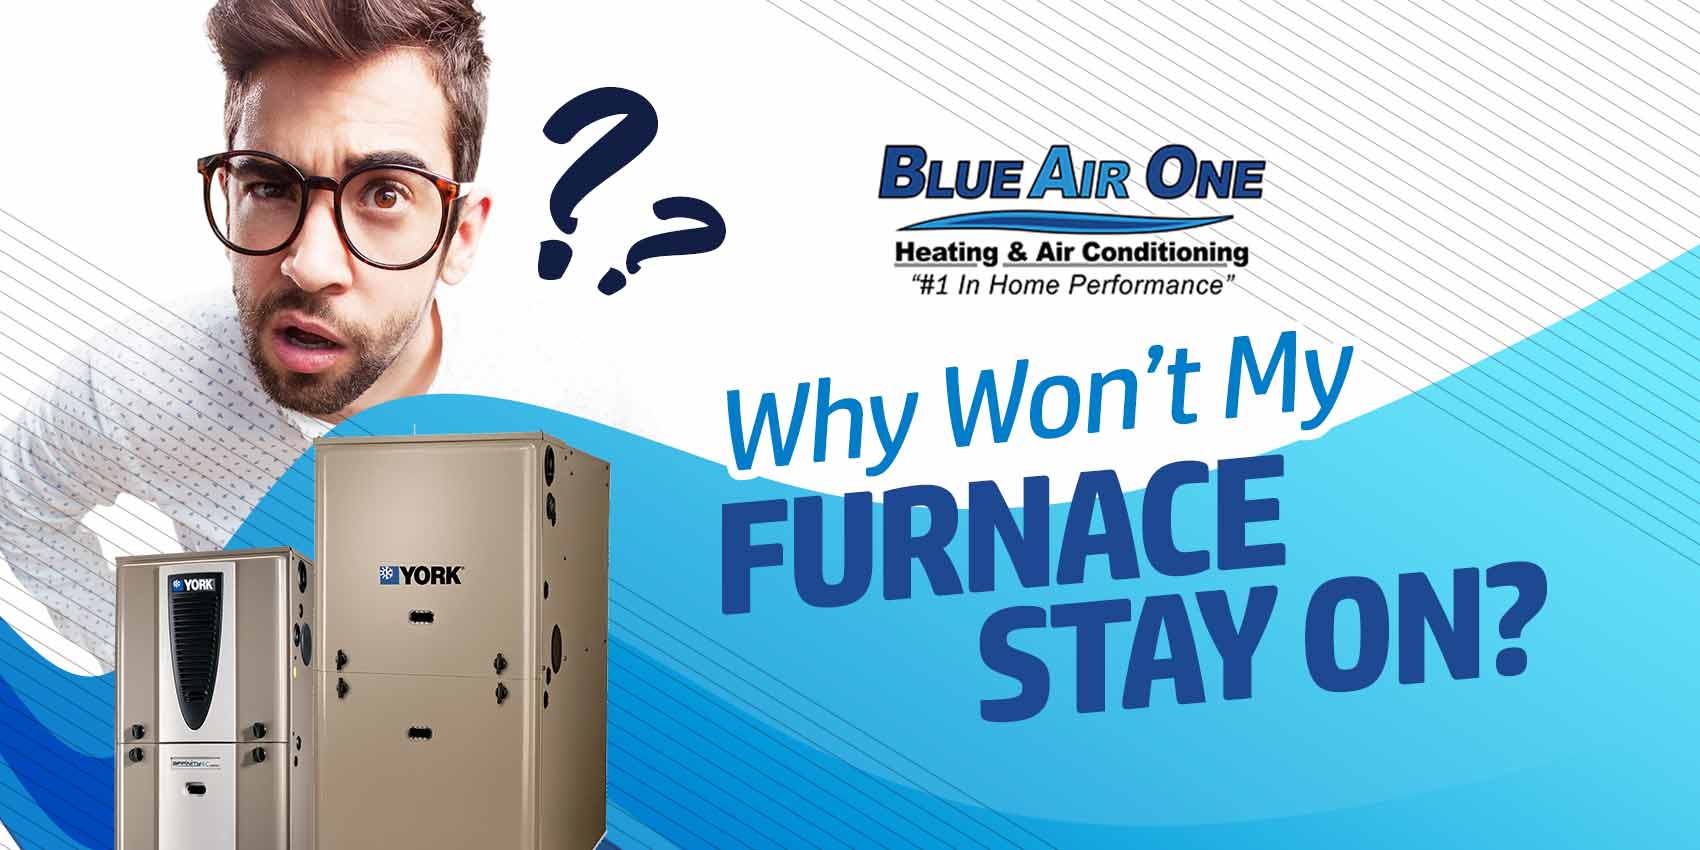 Why Won't My Furnace Stay On?